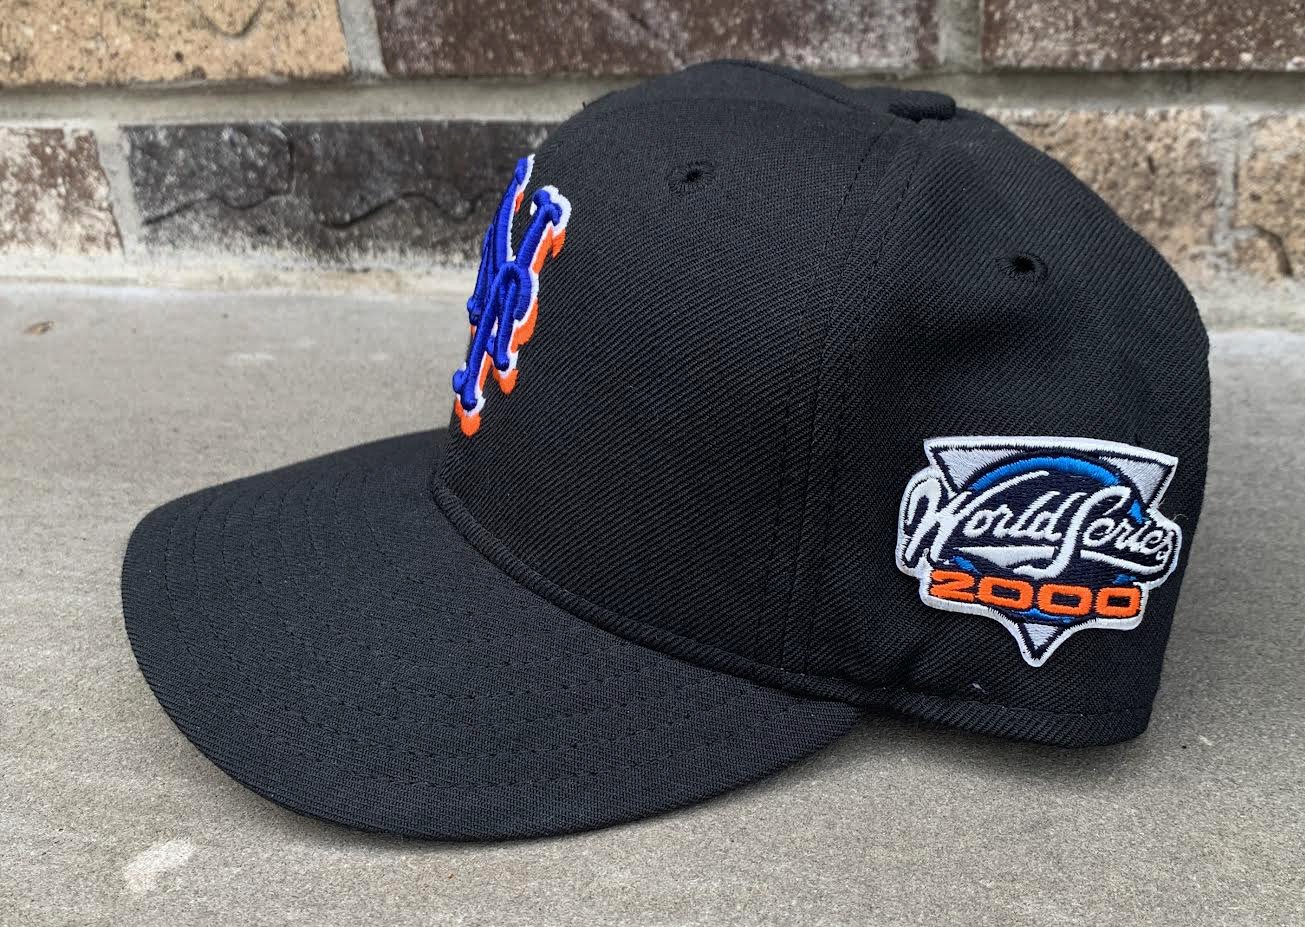 Vintage New Era New York Mets Black WS 2000 Fitted Hat (Size 7 1/4